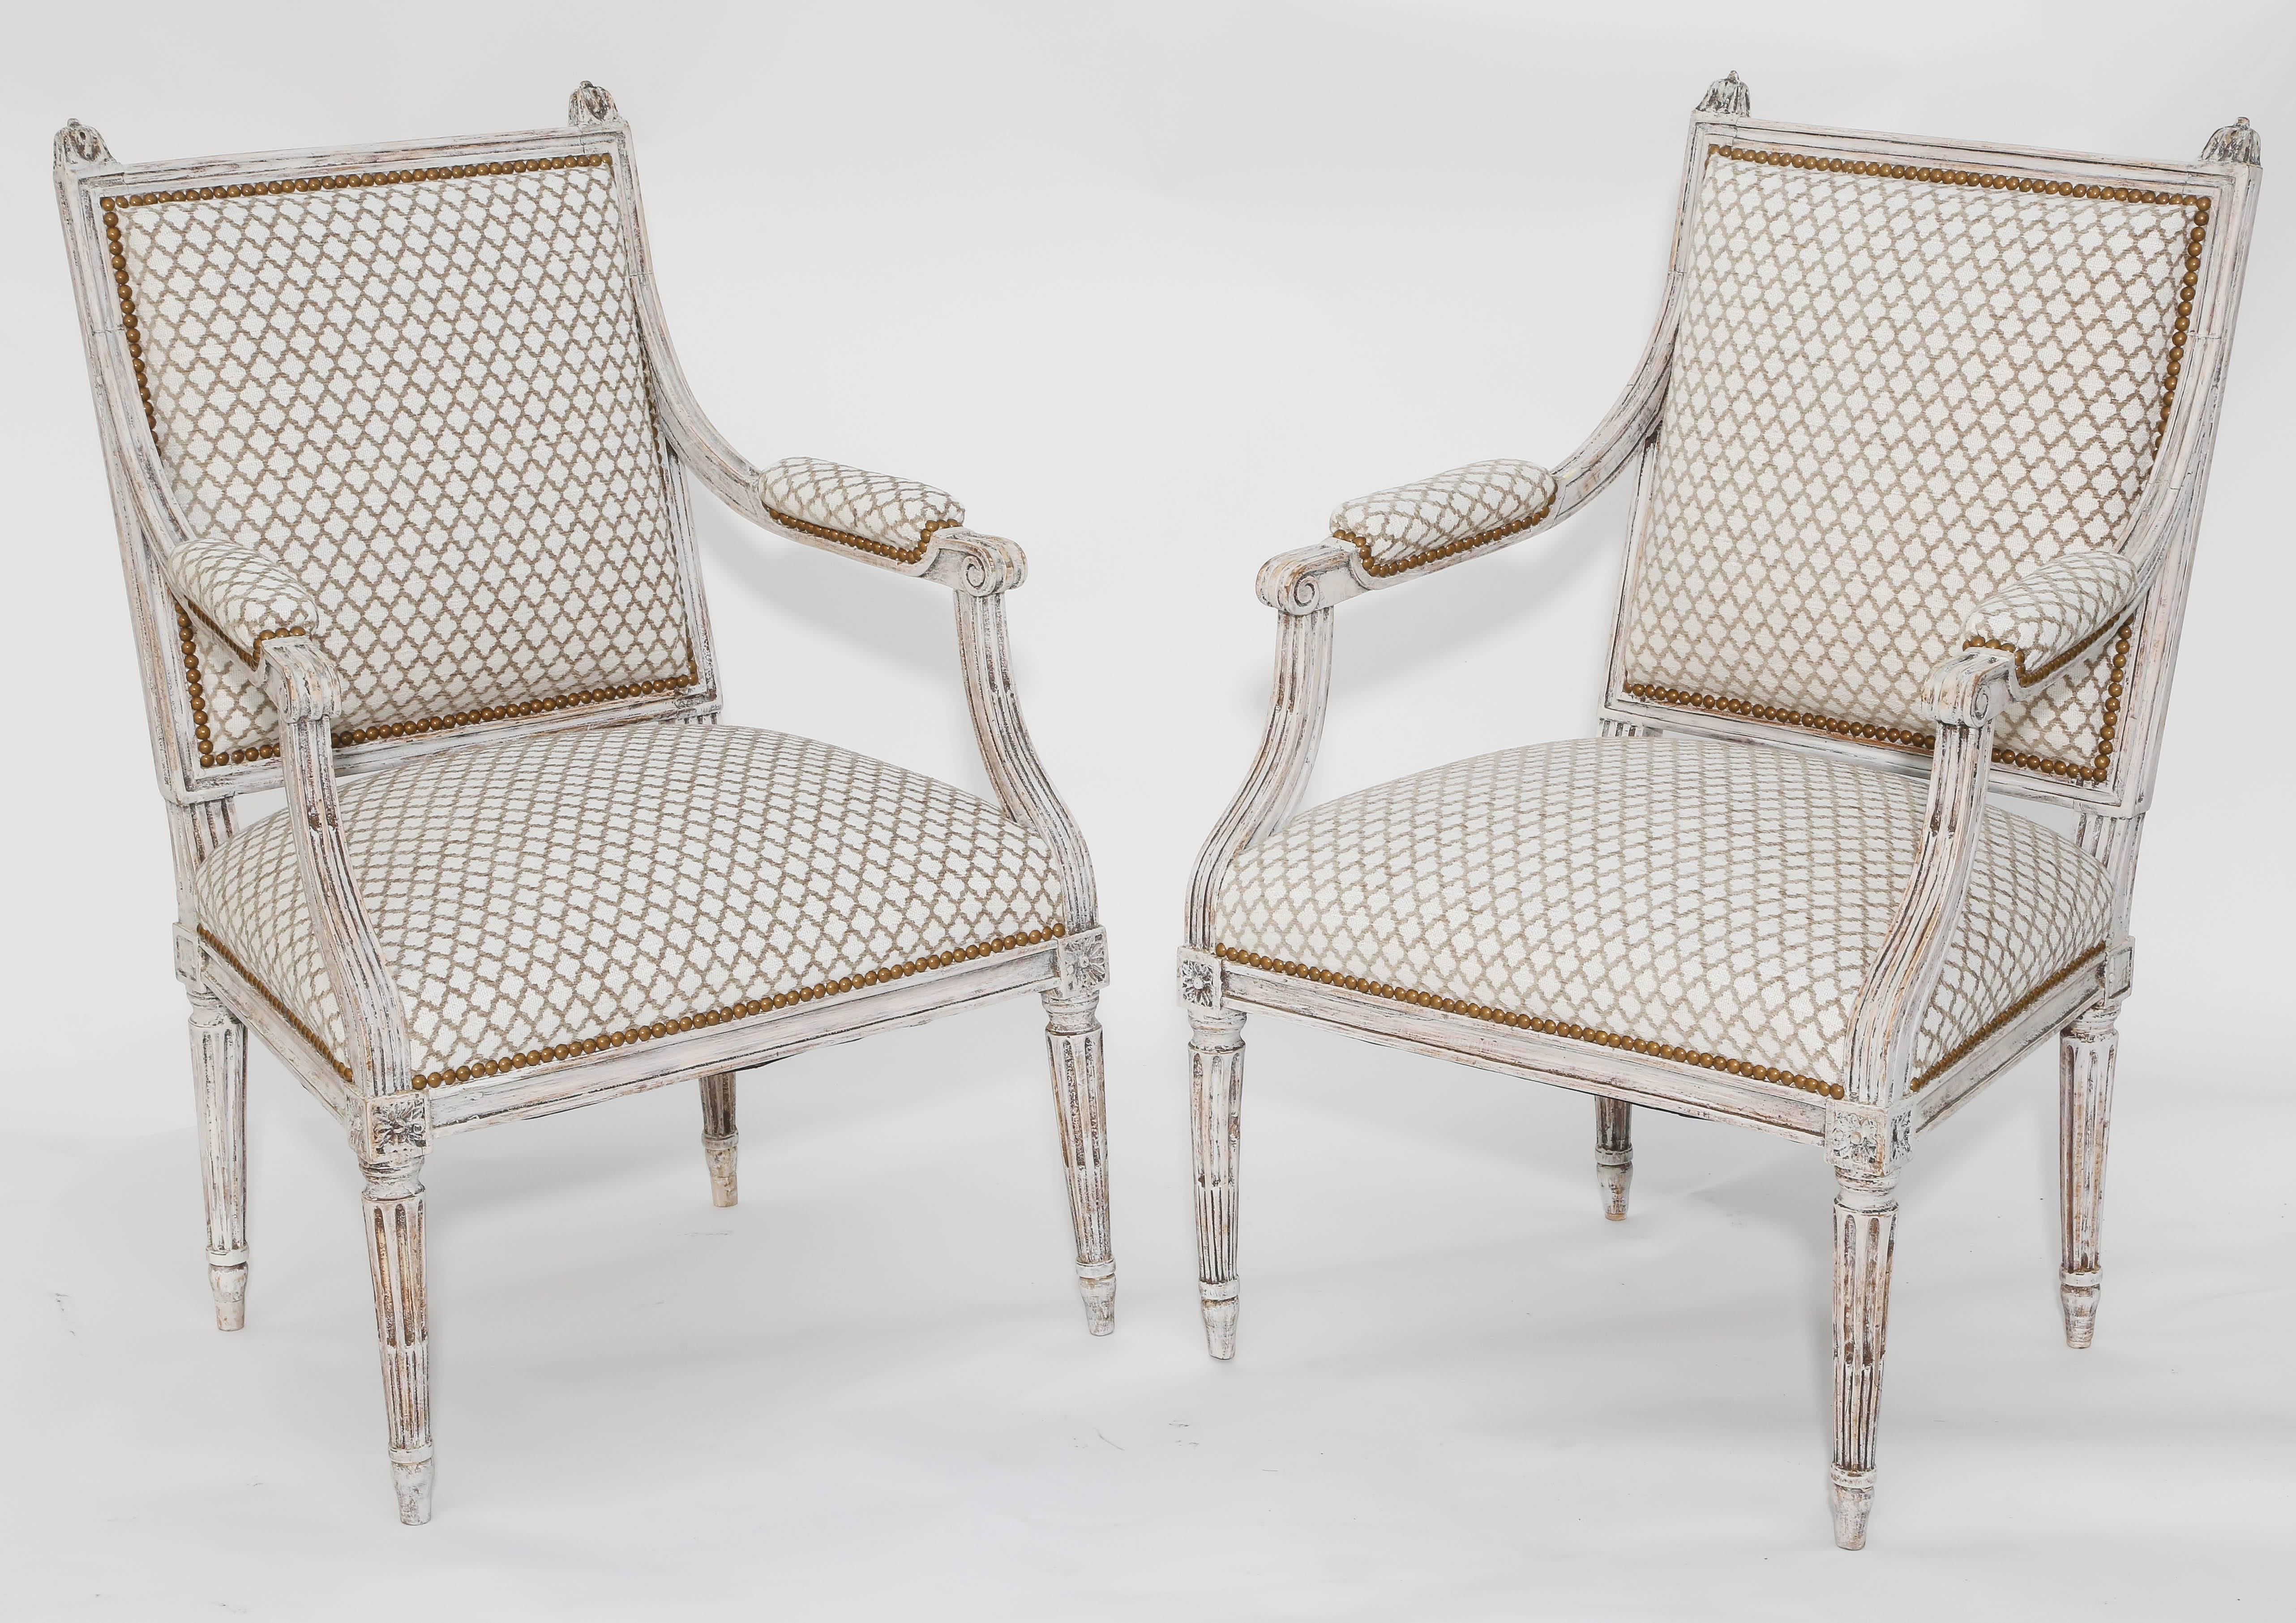 Pair of armchairs, having distressed painted finish, each with square back, outswept arms with padded elbow rests, back and crown seat with nailheads, raised on round fluted legs with toupie feet.

Stock ID: D9350